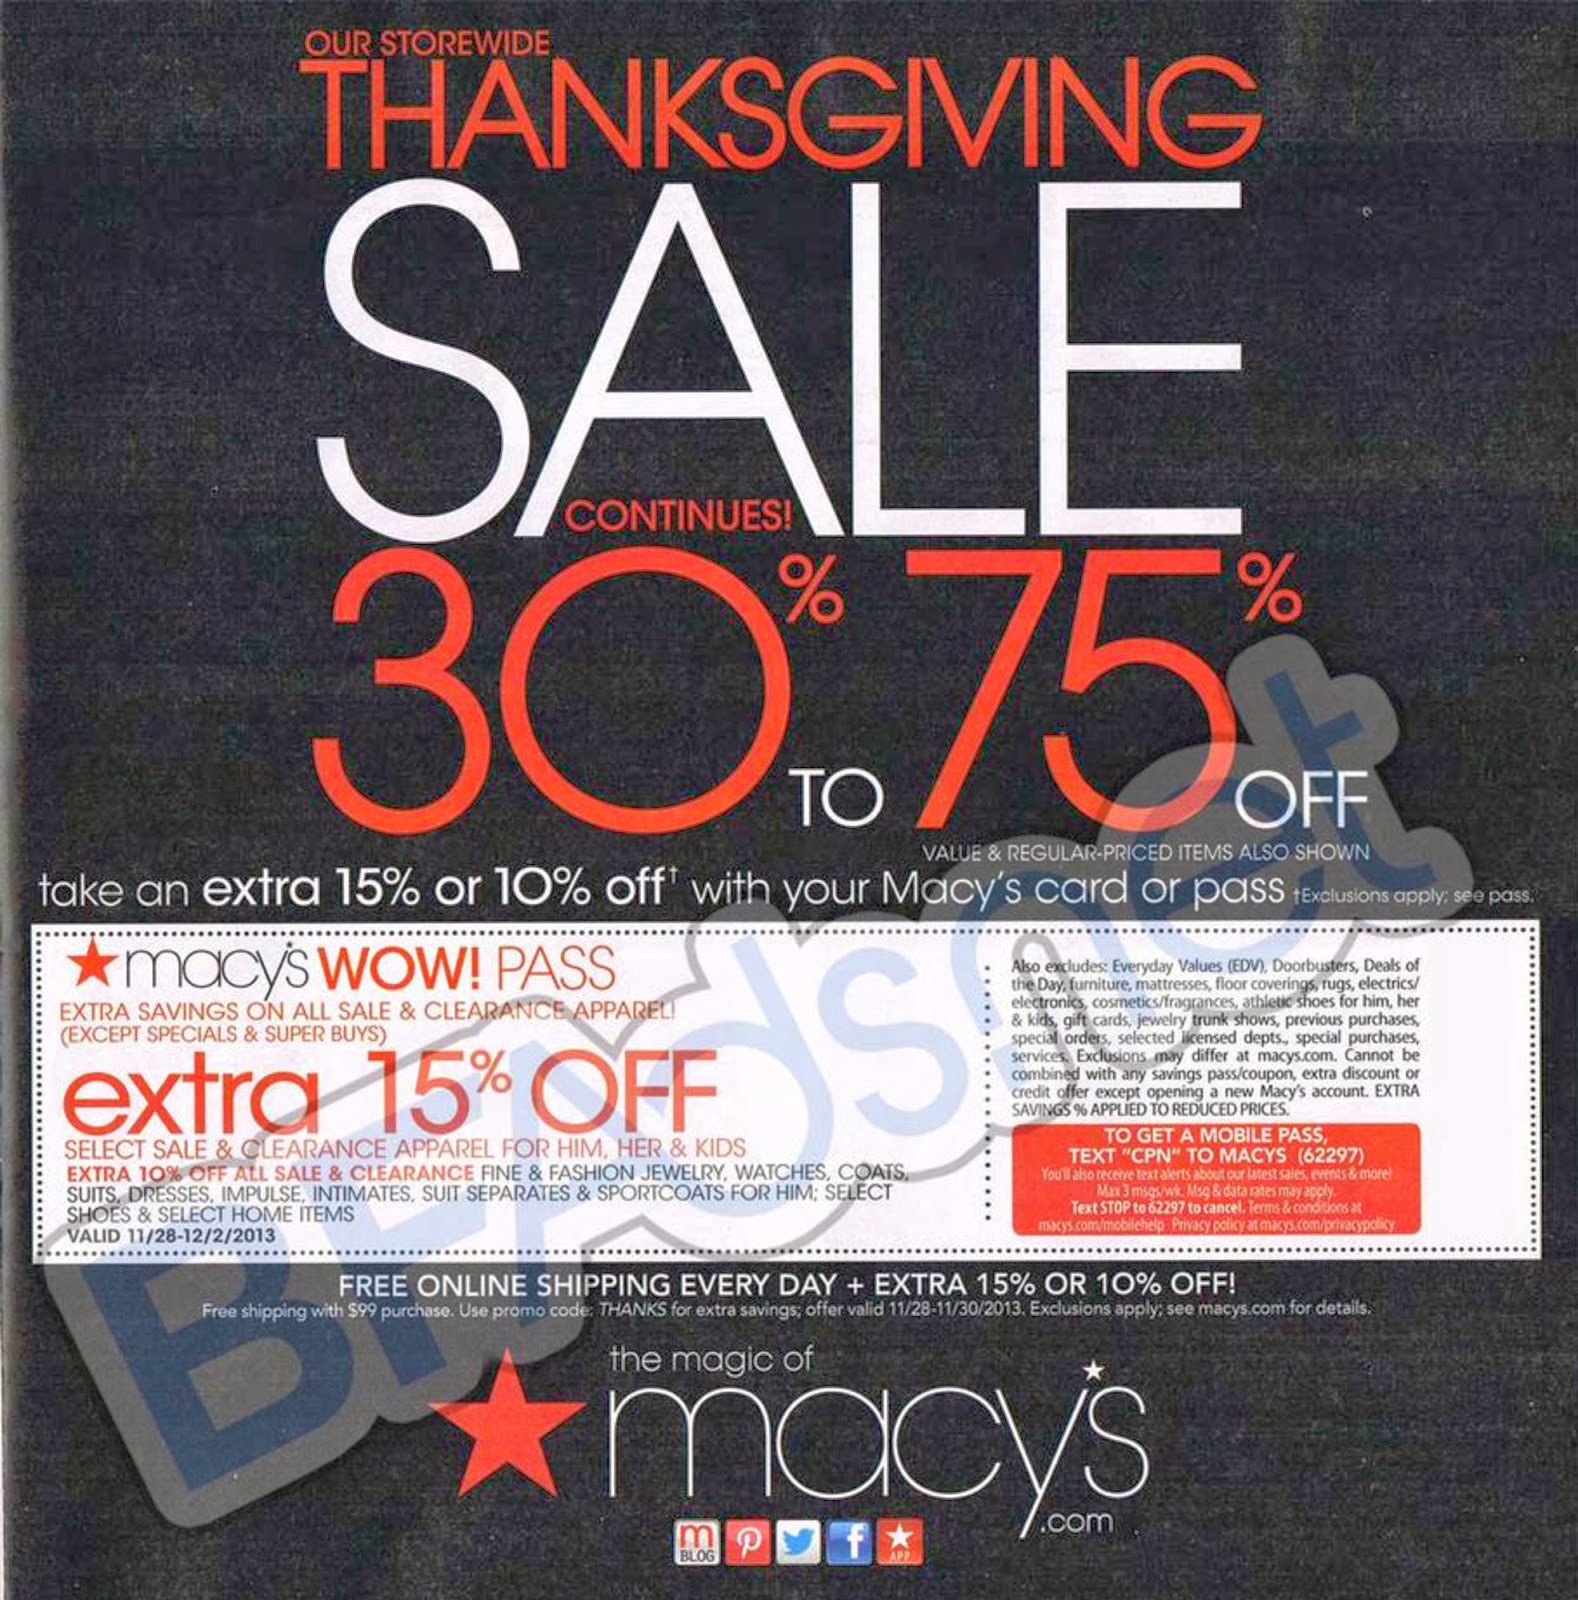 Macy's Thanksgiving Sale 2013 | Black Friday Ads 2013